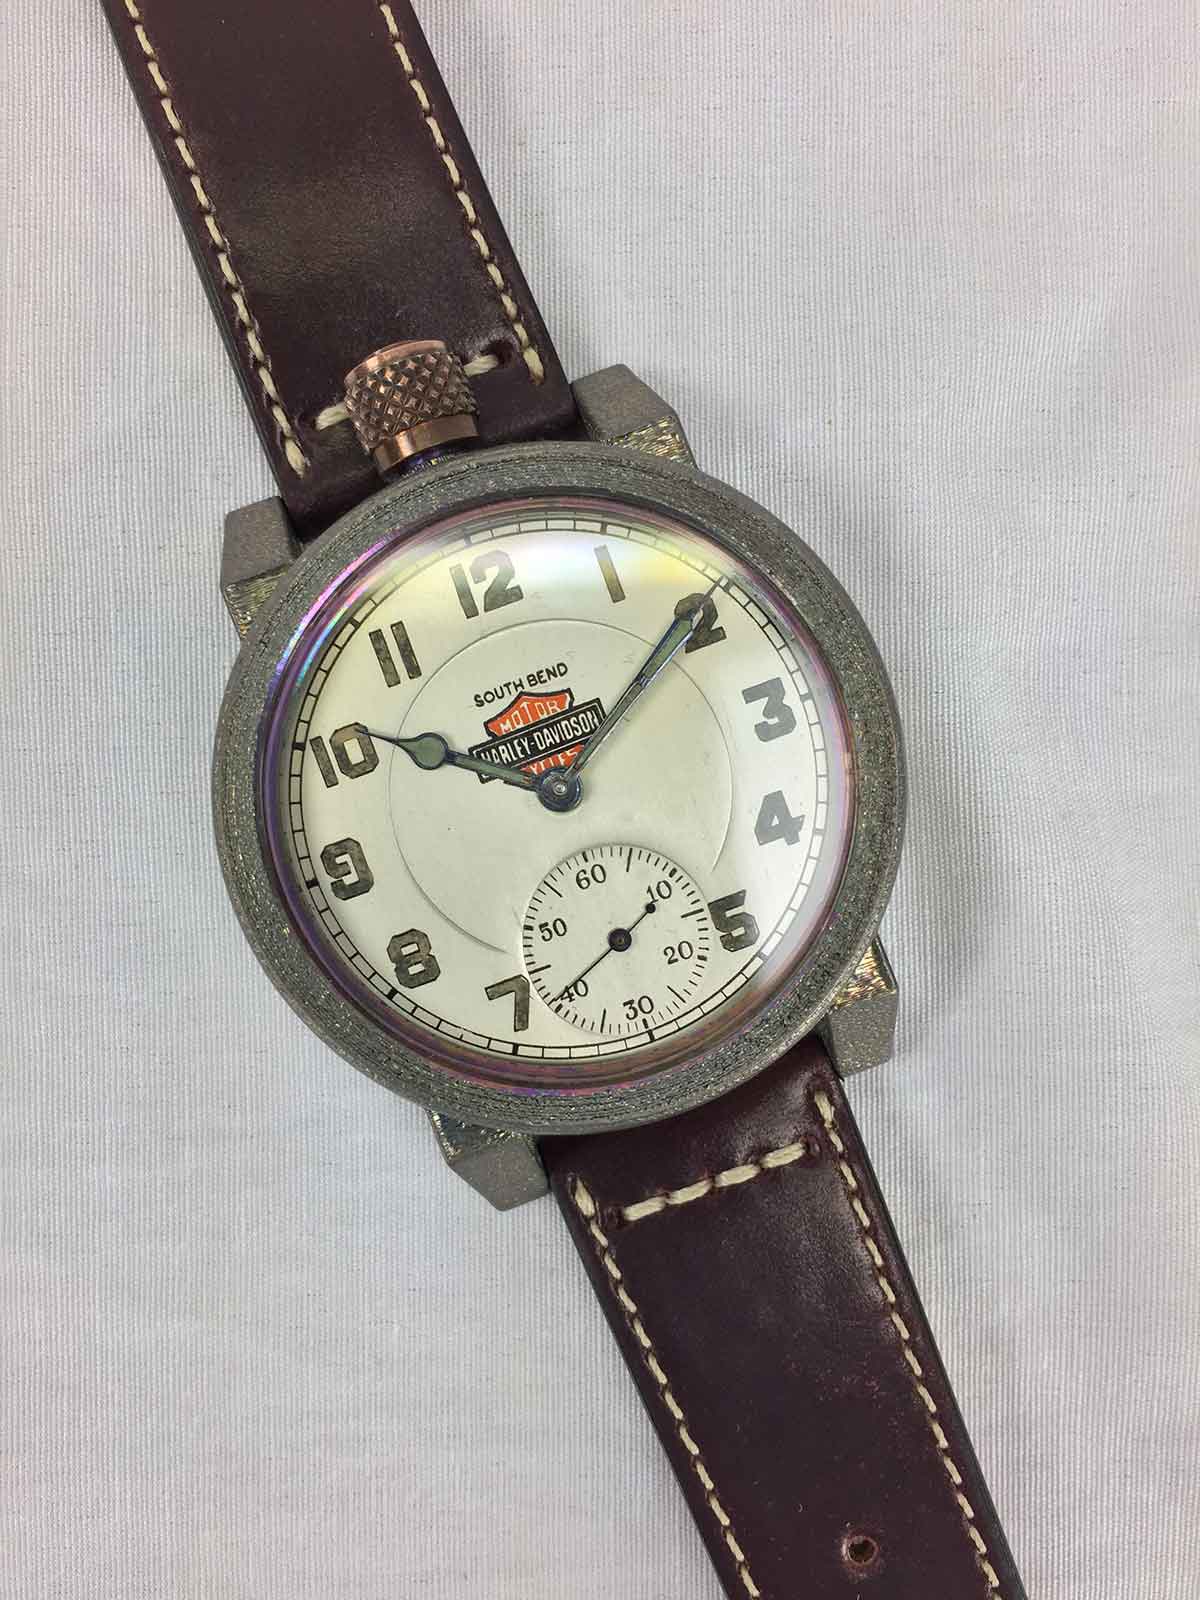 Dial of the Vortic Watch Co., Harley Davidson wristwatch.